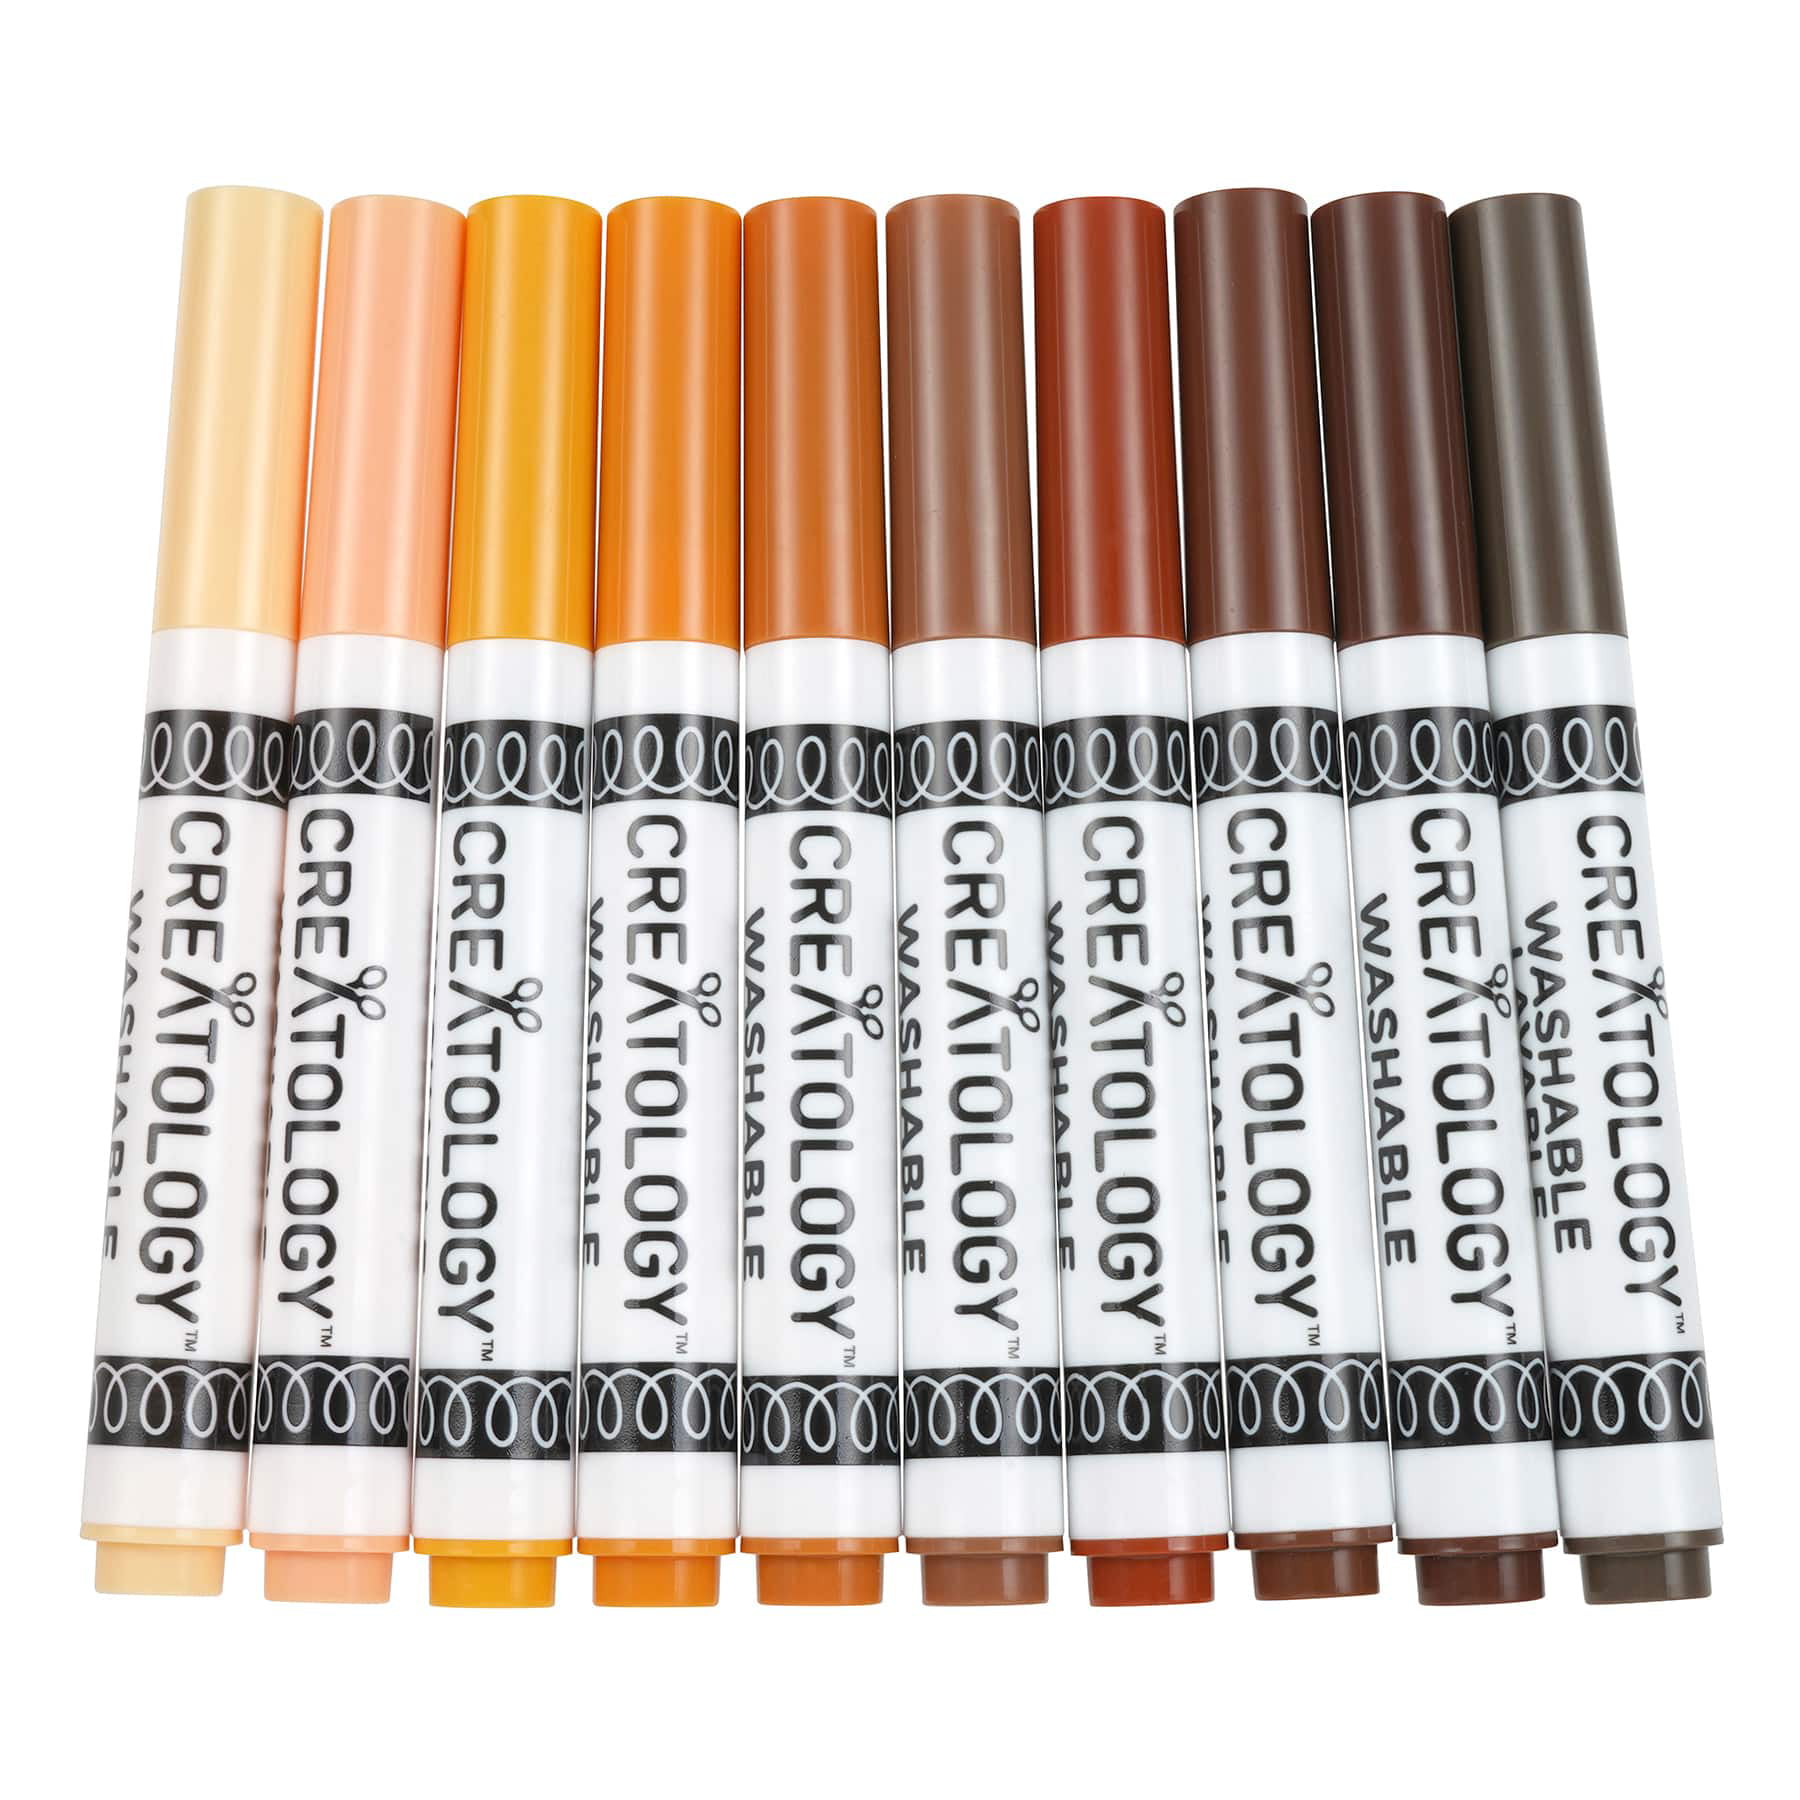 Comparing 8 Skin-tone Marker Set. Which is best for you? – The